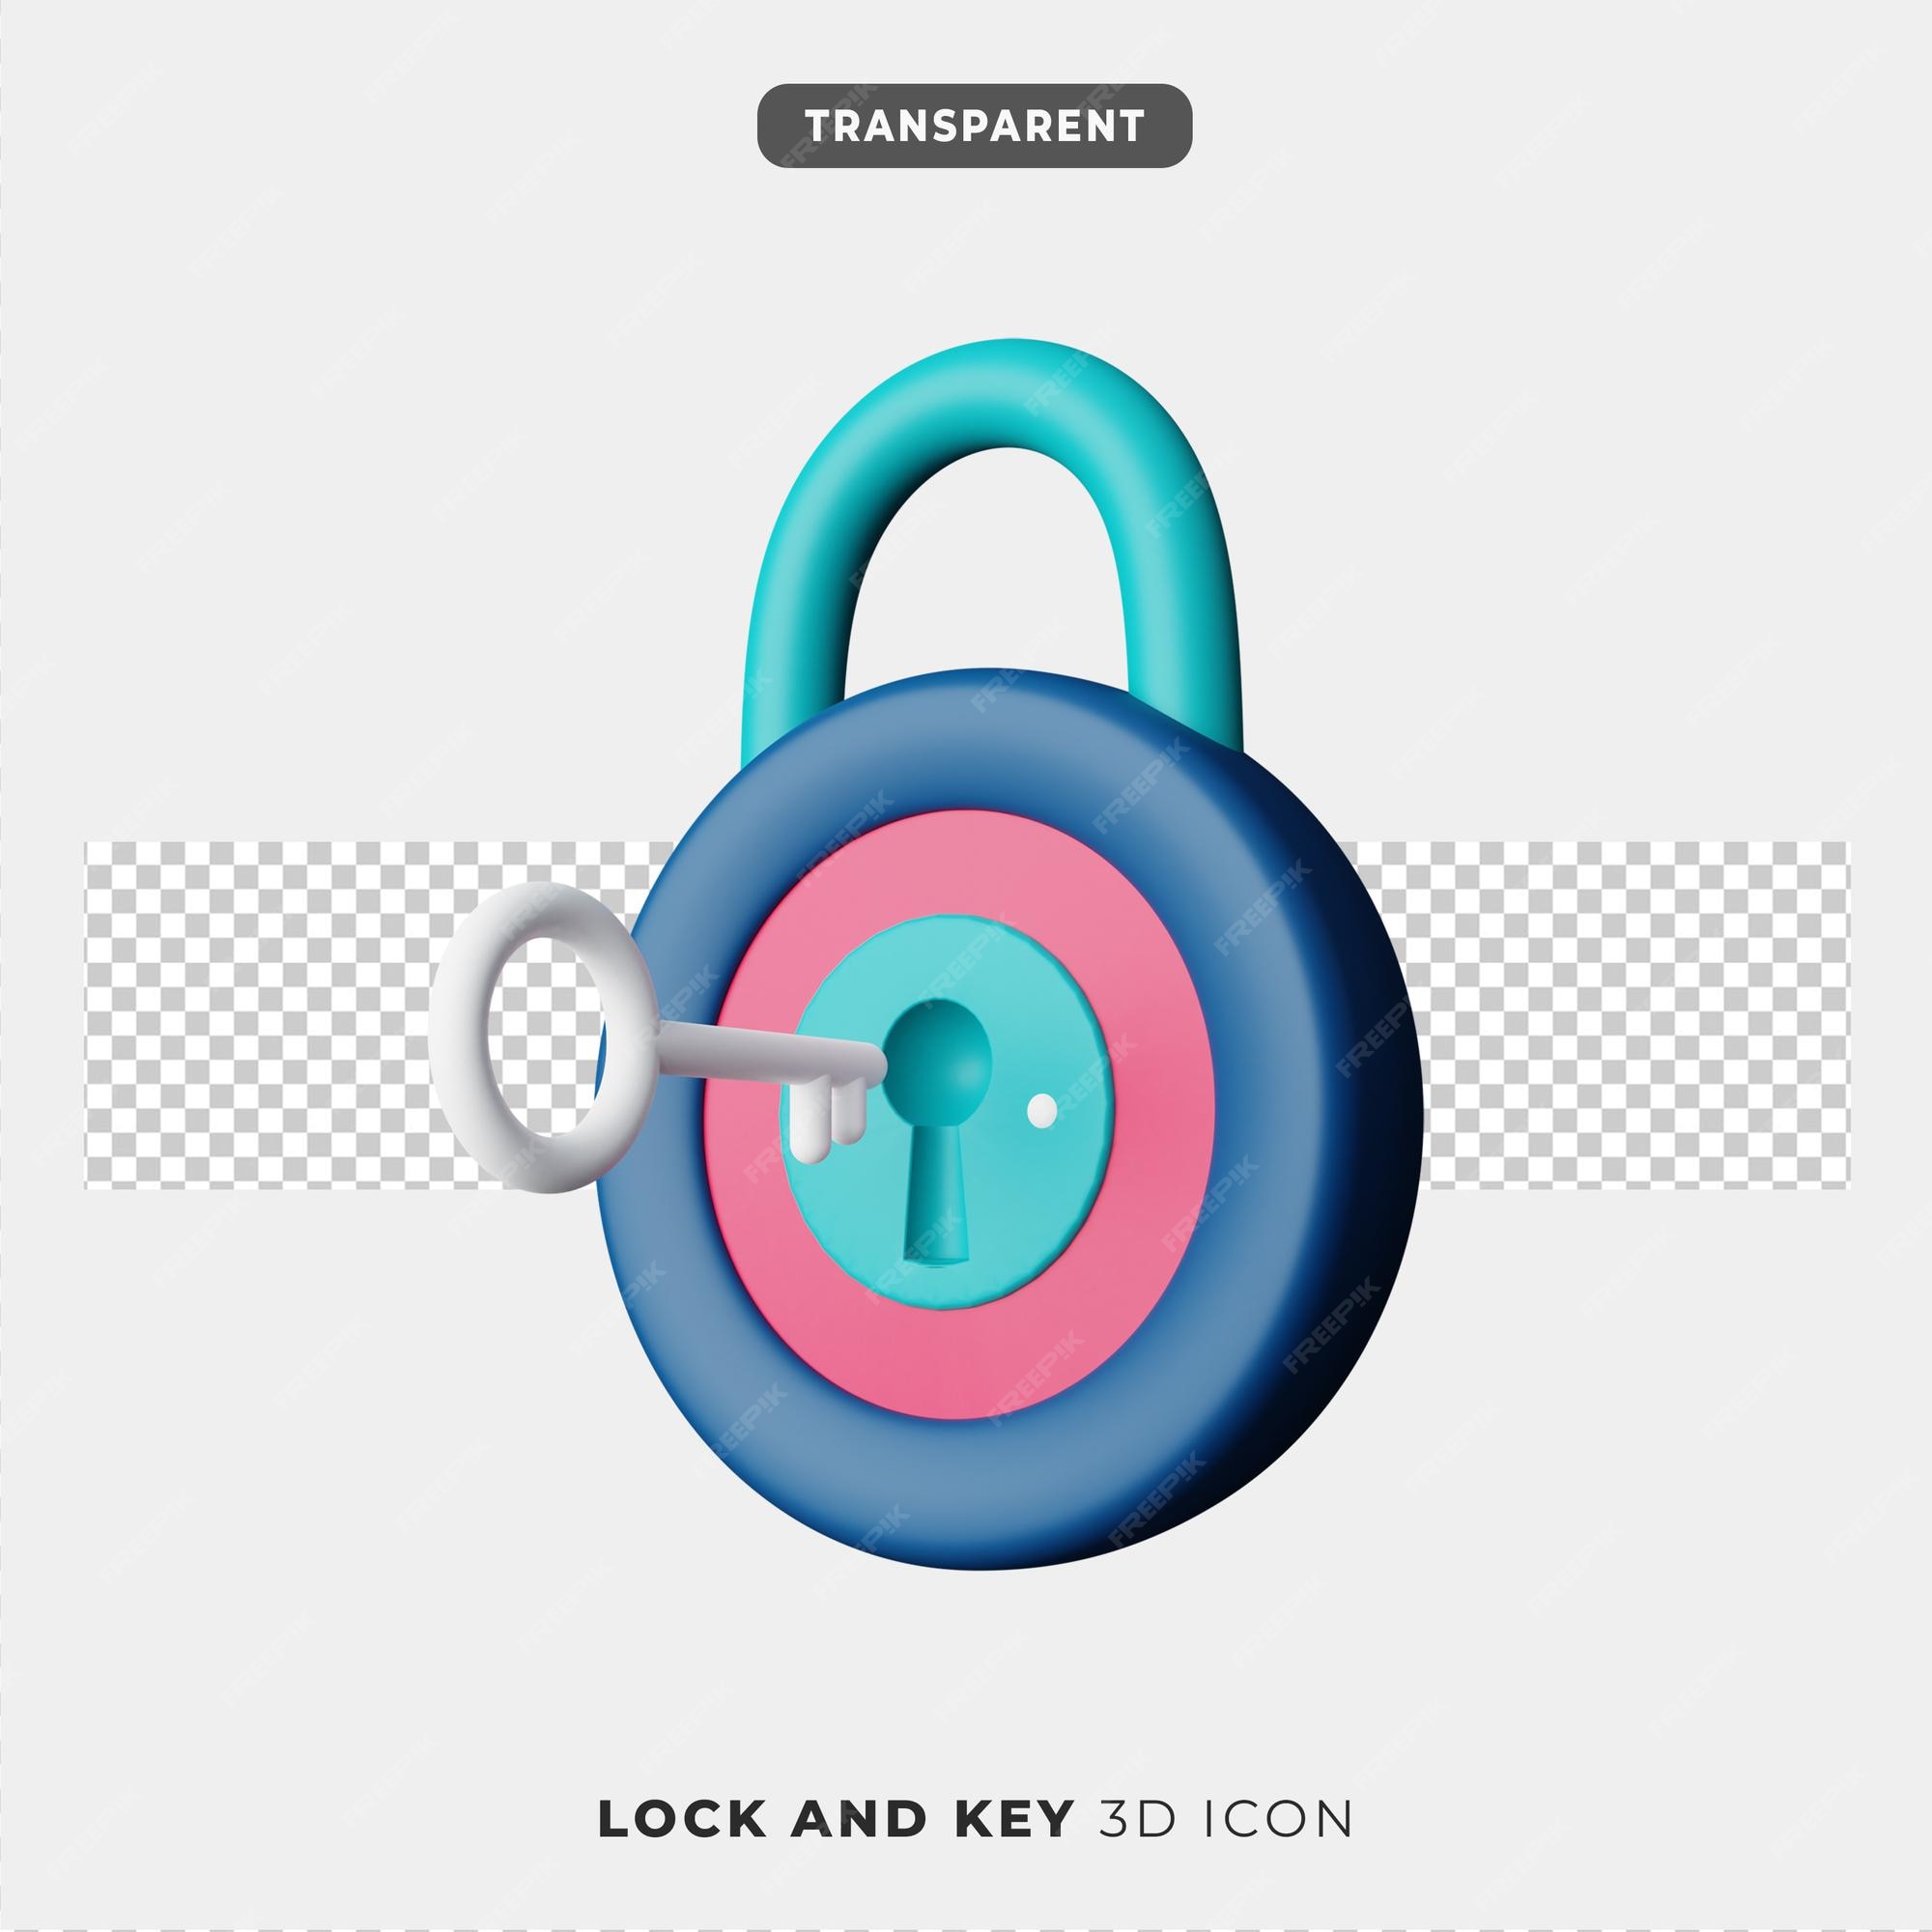 Premium PSD | 3d icon of lock and key